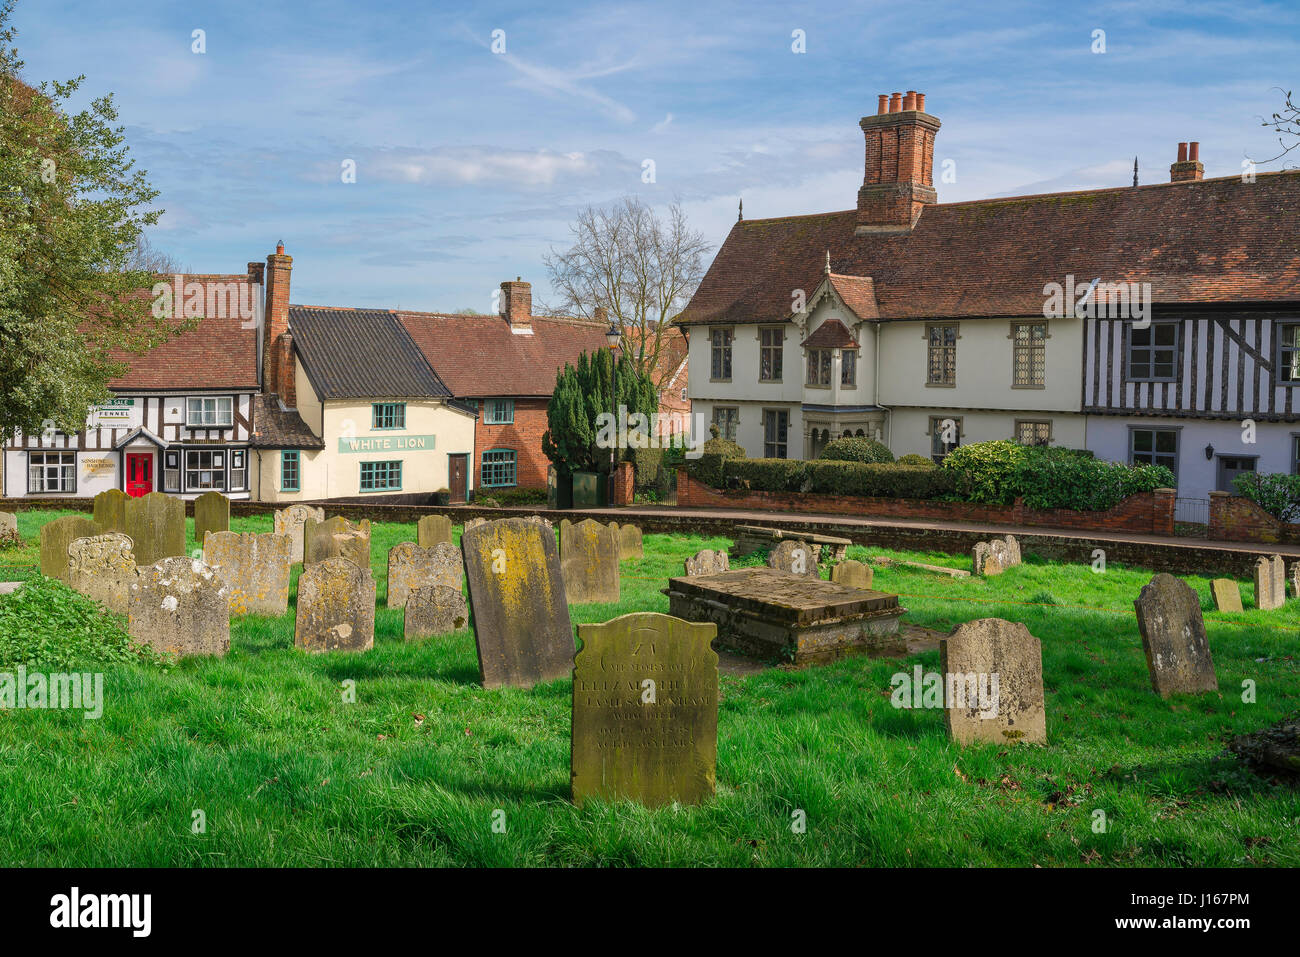 Halesworth Suffolk, view of the churchyard and medieval buildings along London Road in the centre of the rural Suffolk town of Halesworth, England UK Stock Photo